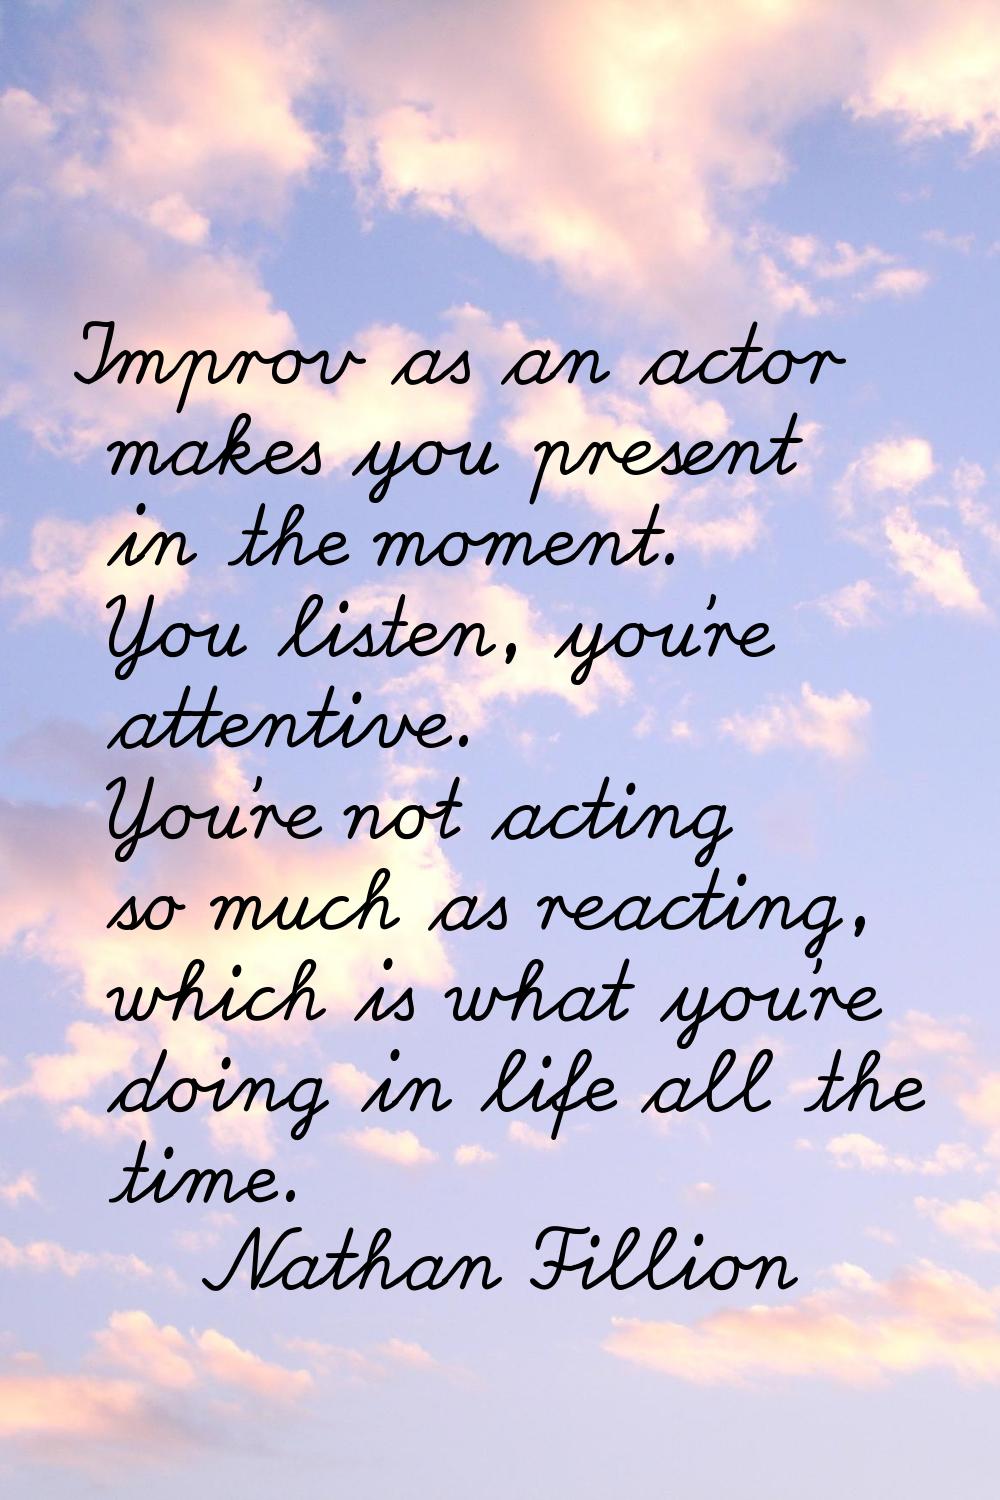 Improv as an actor makes you present in the moment. You listen, you're attentive. You're not acting